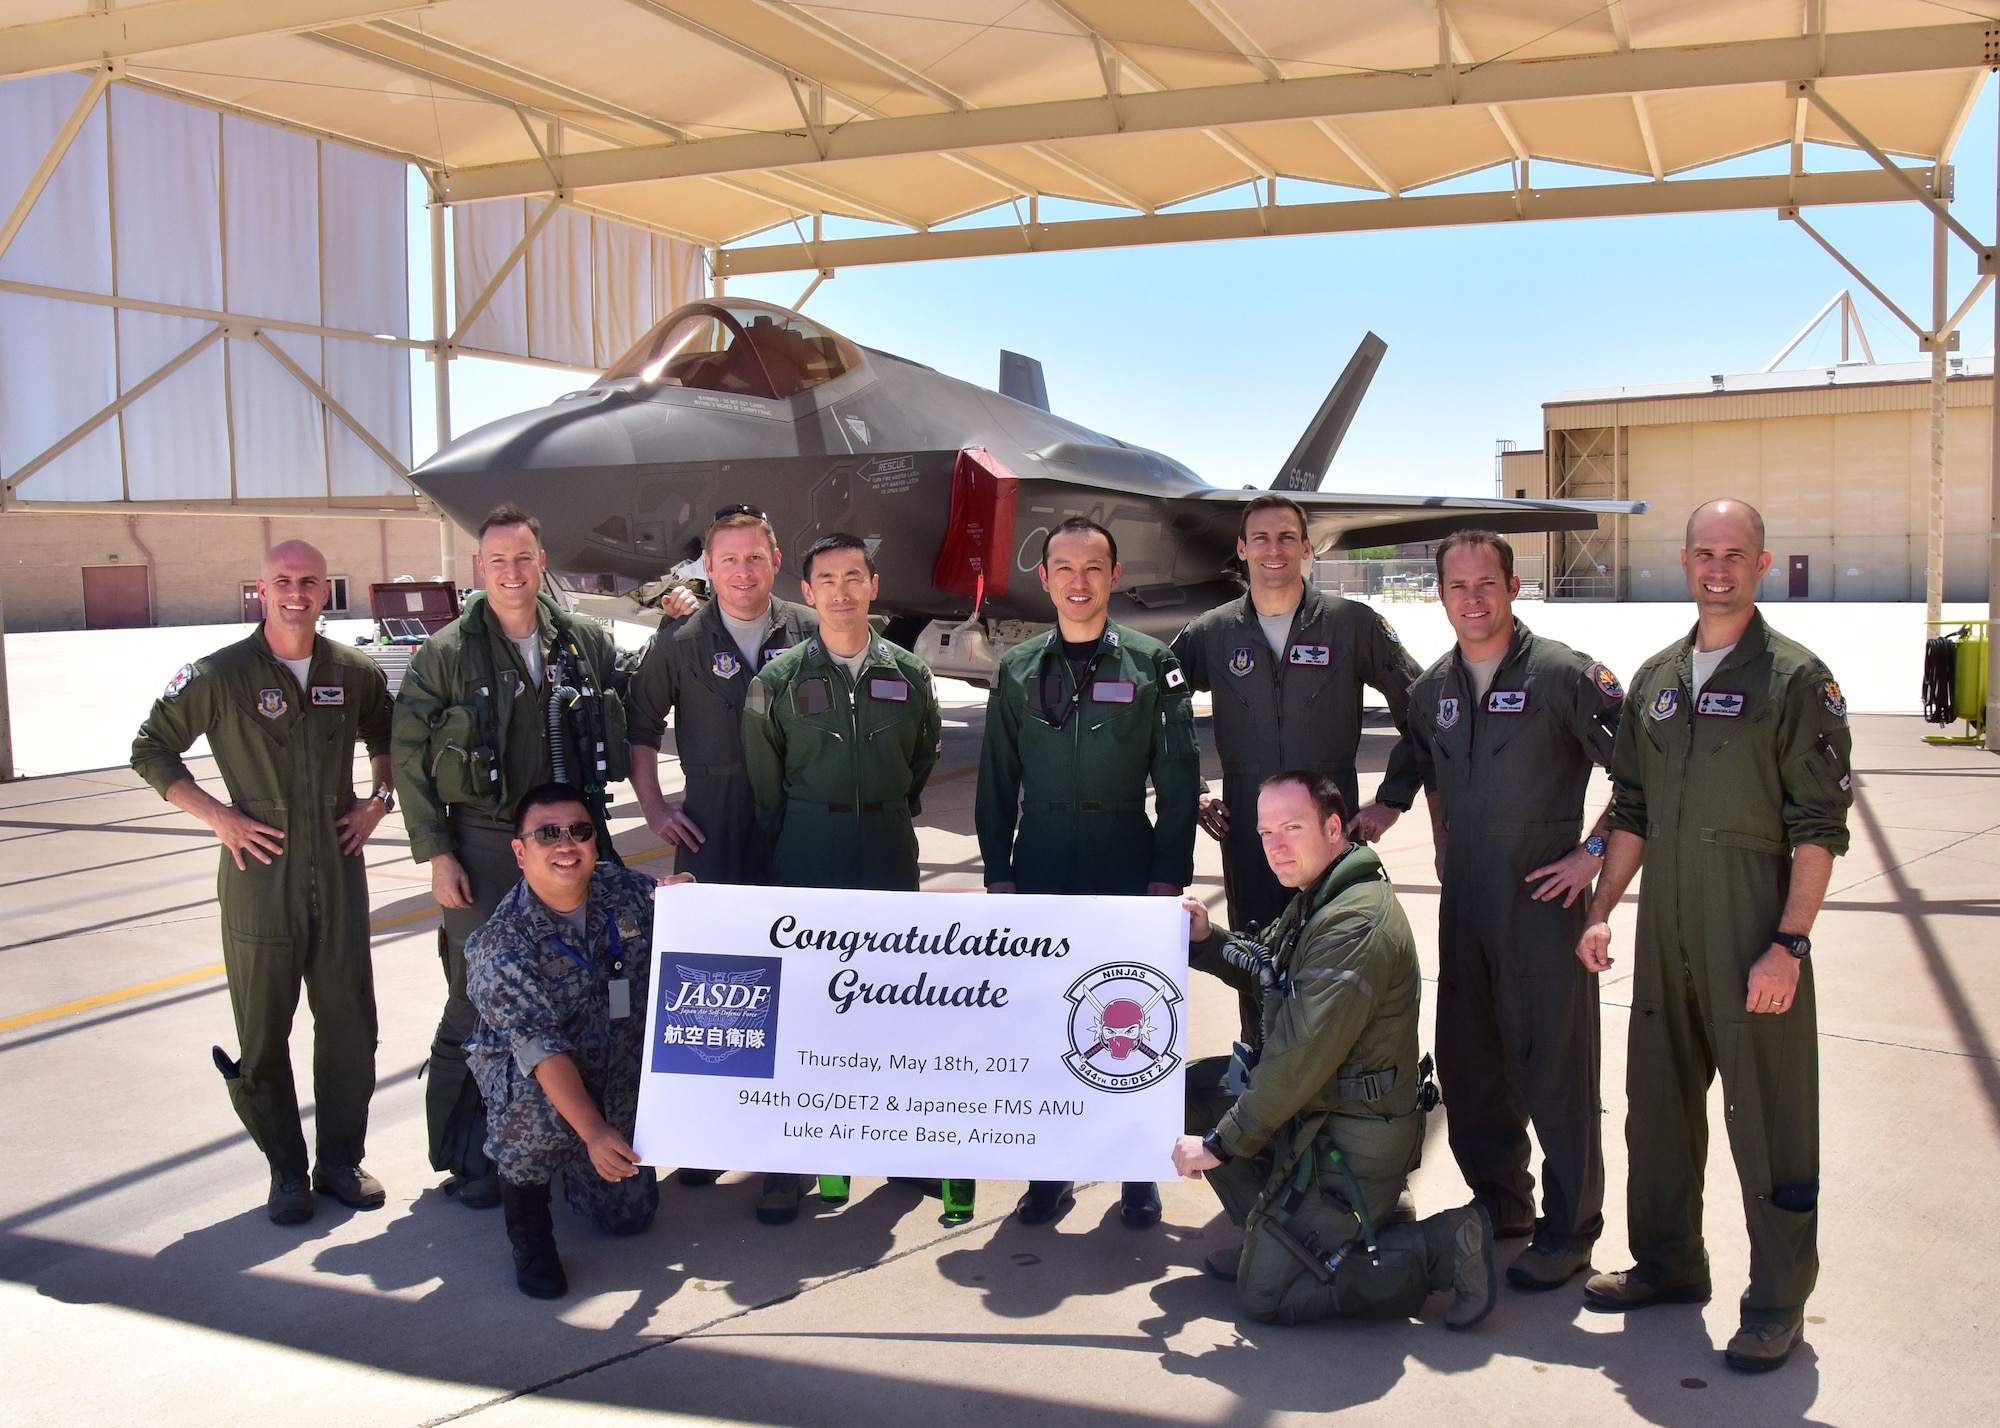 Members from the 944th Operations Group Detachment 2 “Ninjas” and Japan Air Self-Defense Force, pose for a photo May 18 after the graduating JASDF F-35 pilot’s final flight here at Luke Air Force Base, Ariz. (U.S. Air Force photo by Tech. Sgt. Louis Vega Jr.)